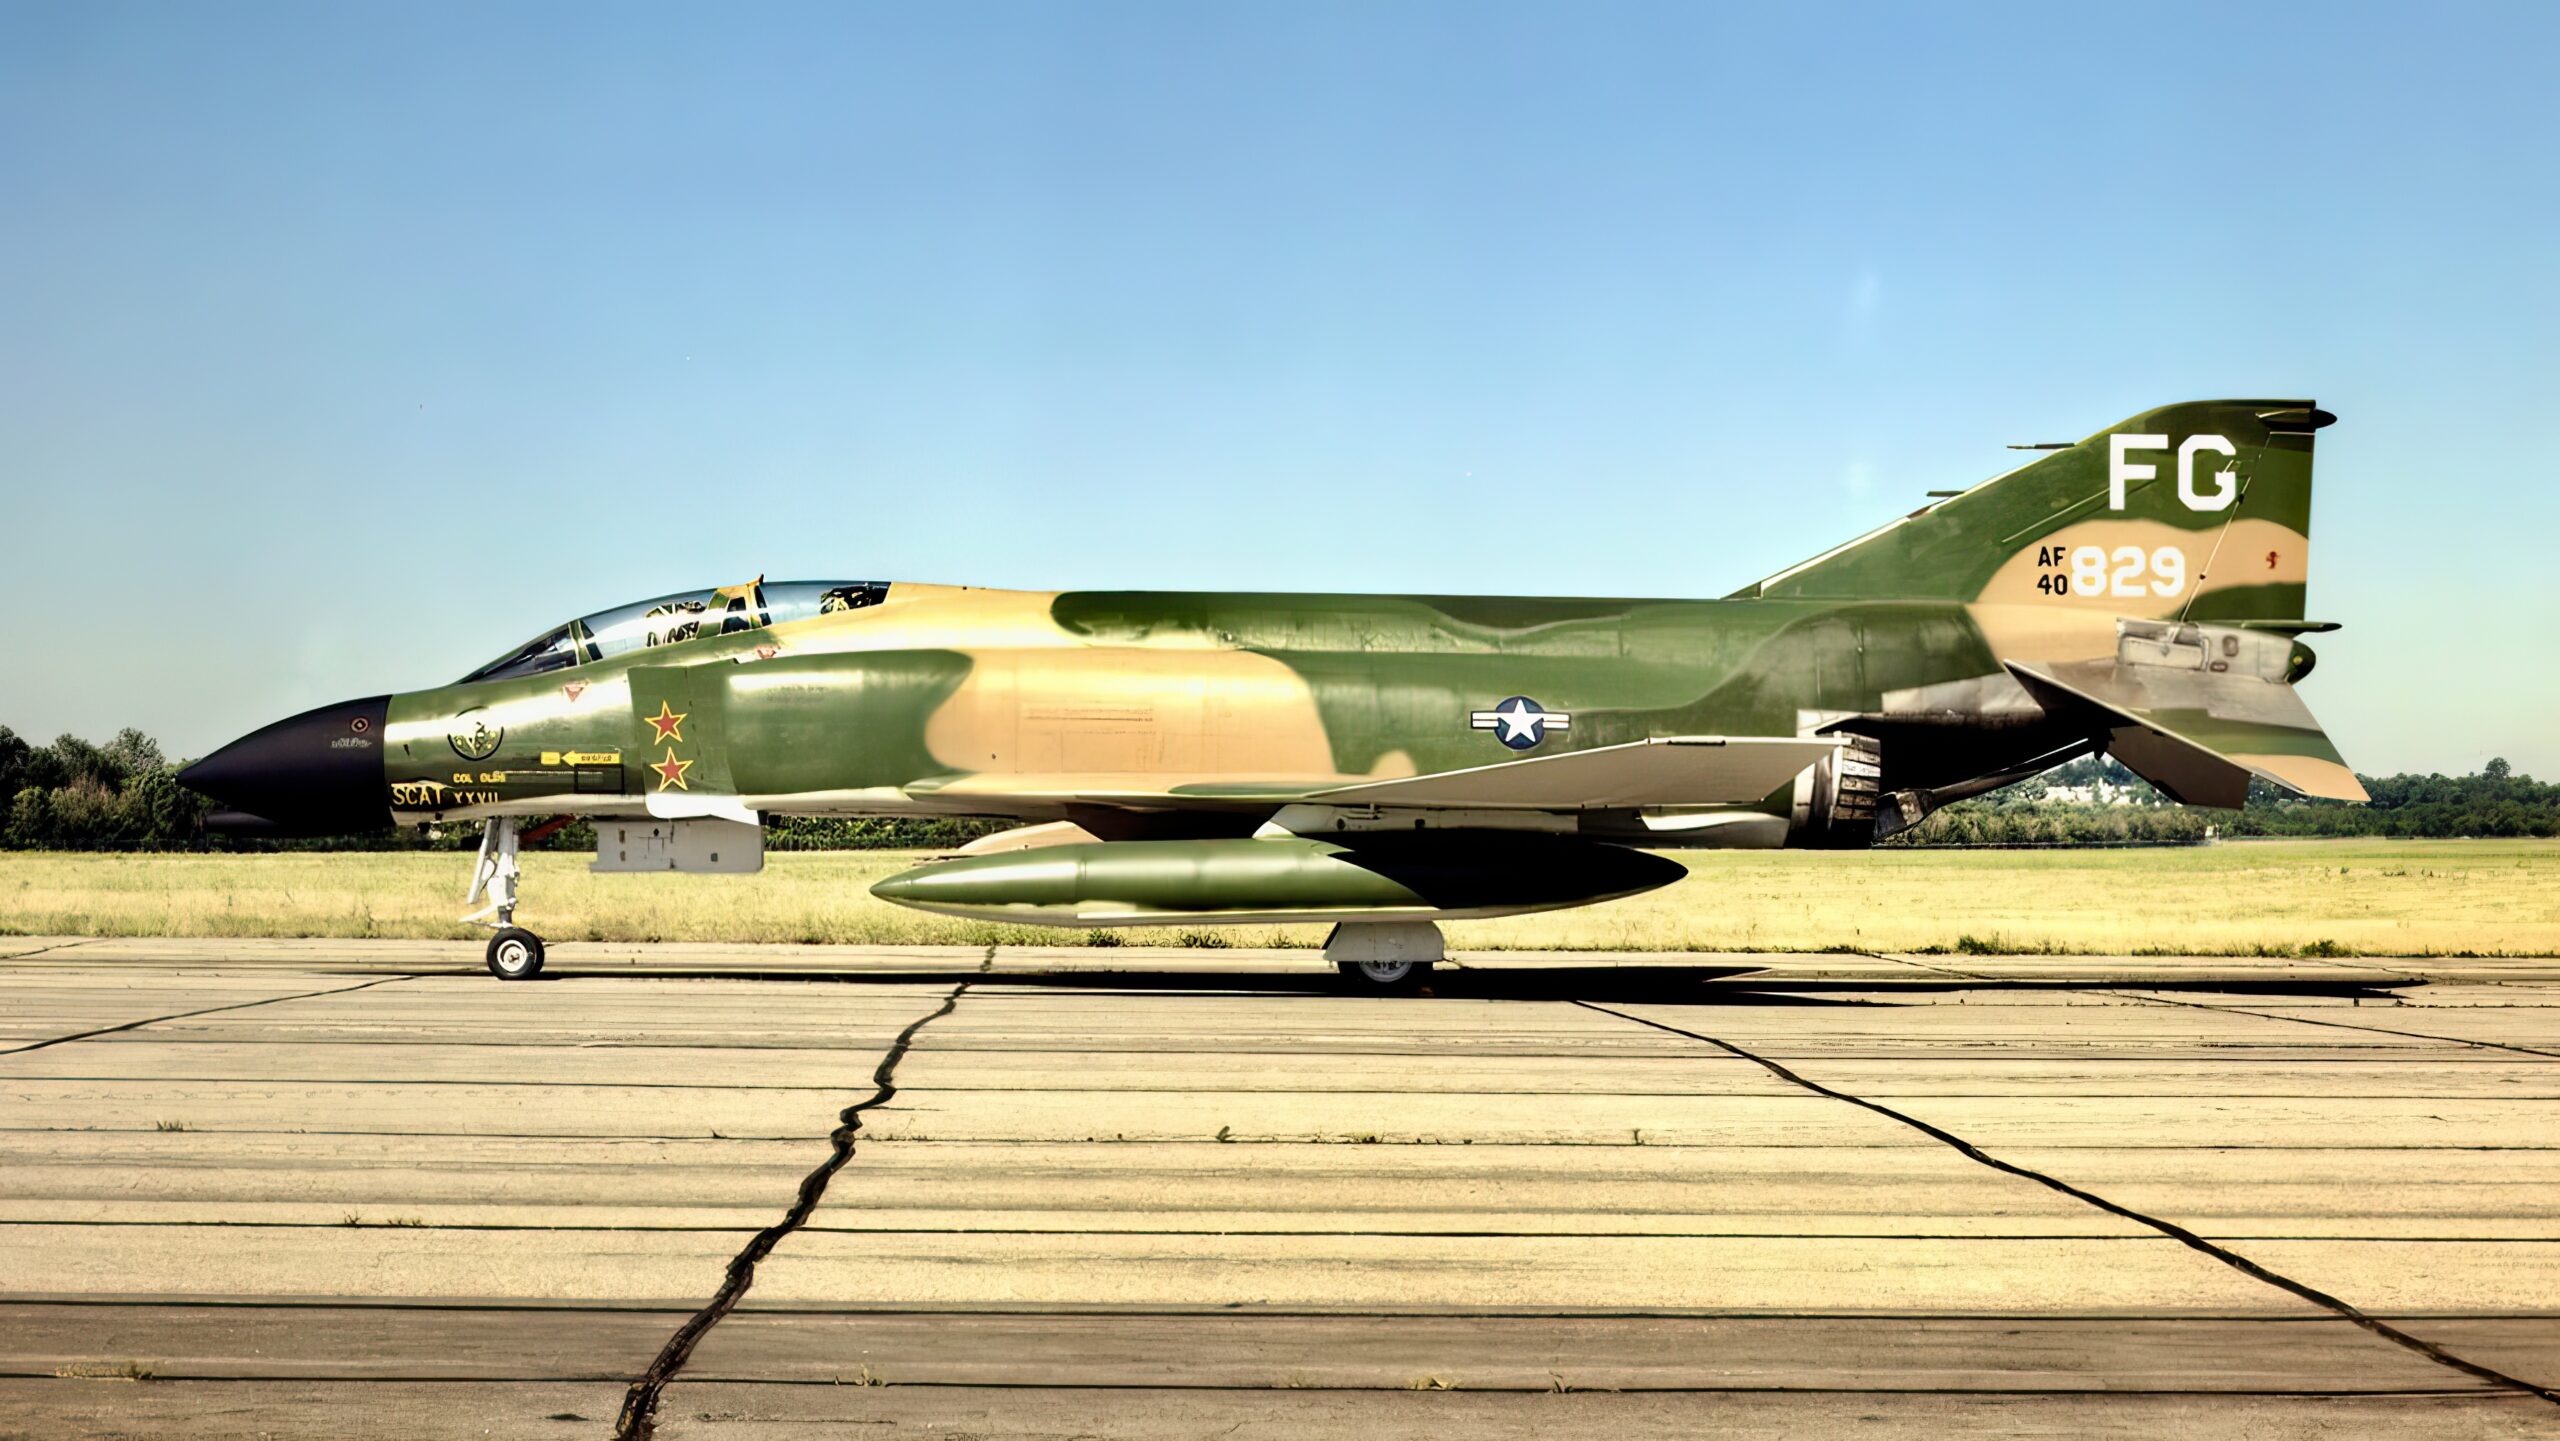 U.S. Air Force McDonnell F-4C-24-MC Phantom II (s/n 64-0829) at the National Museum of the United States Air Force